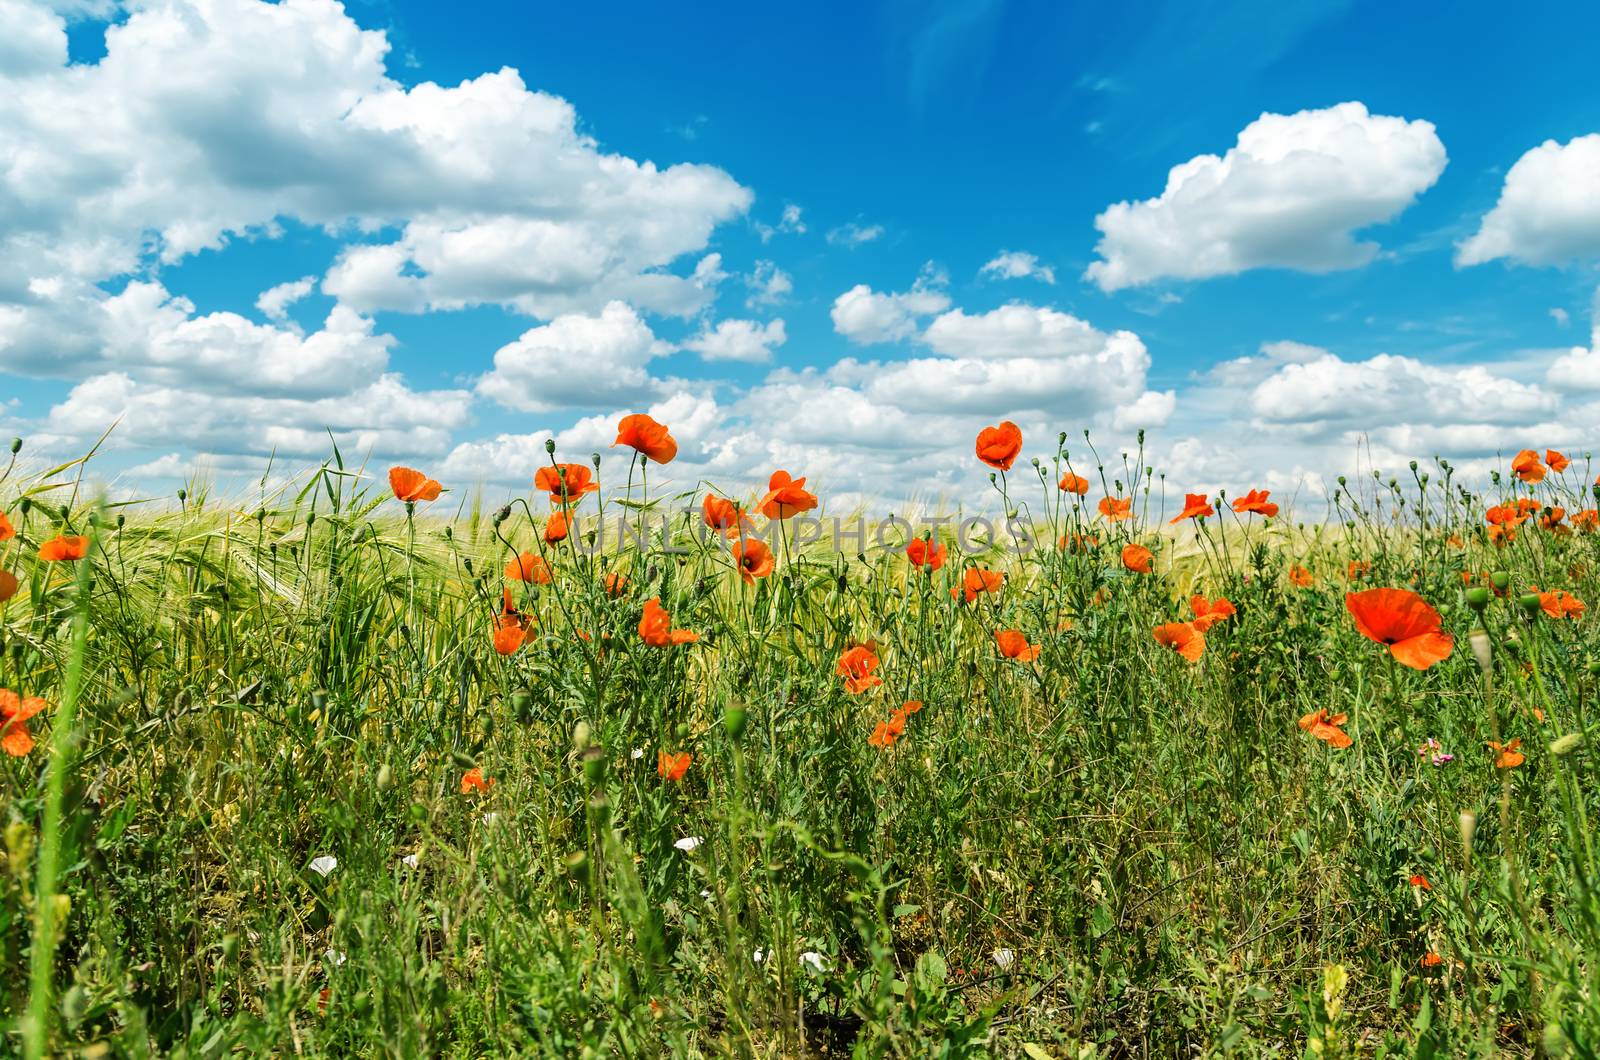 red poppies in green field under sky with clouds by mycola